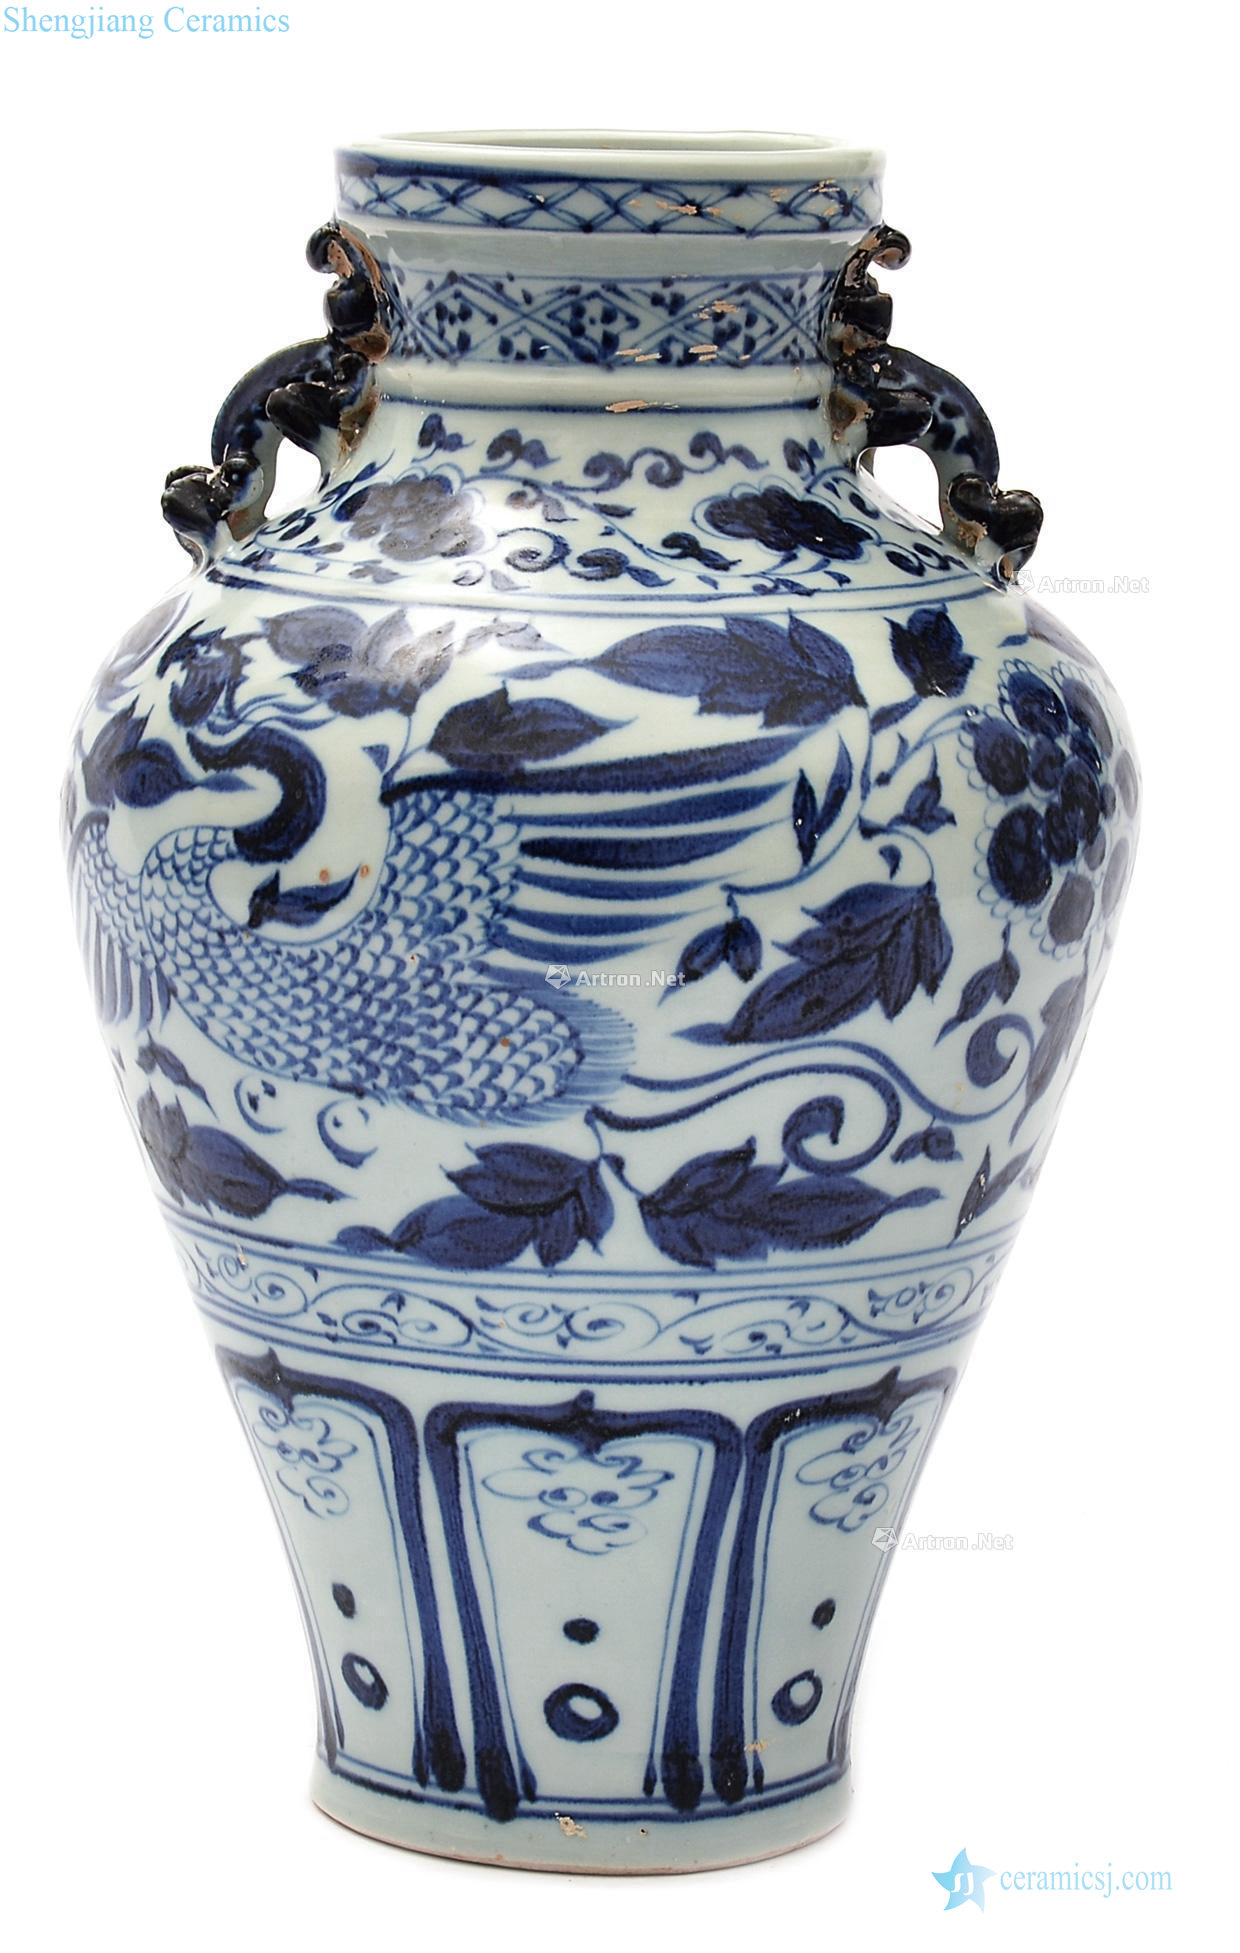 Early Ming dynasty Blue and white floral grain therefore ear dish buccal bottle